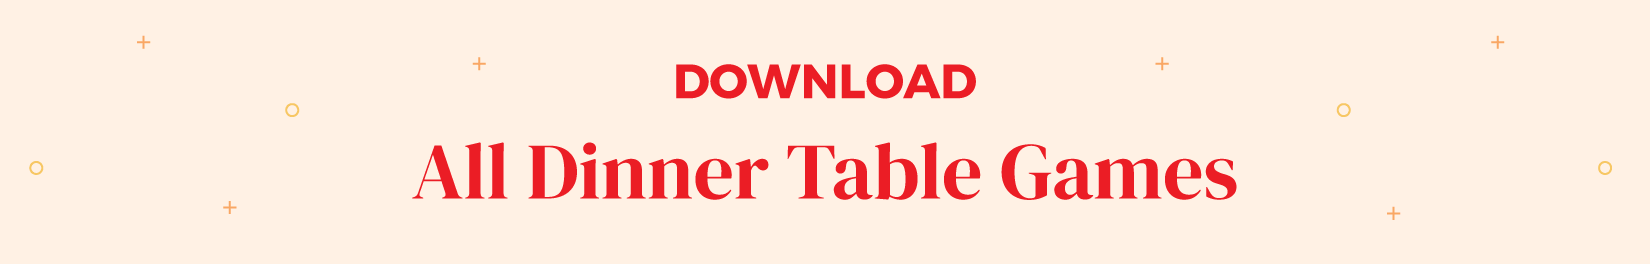 download button for all dinner table games.